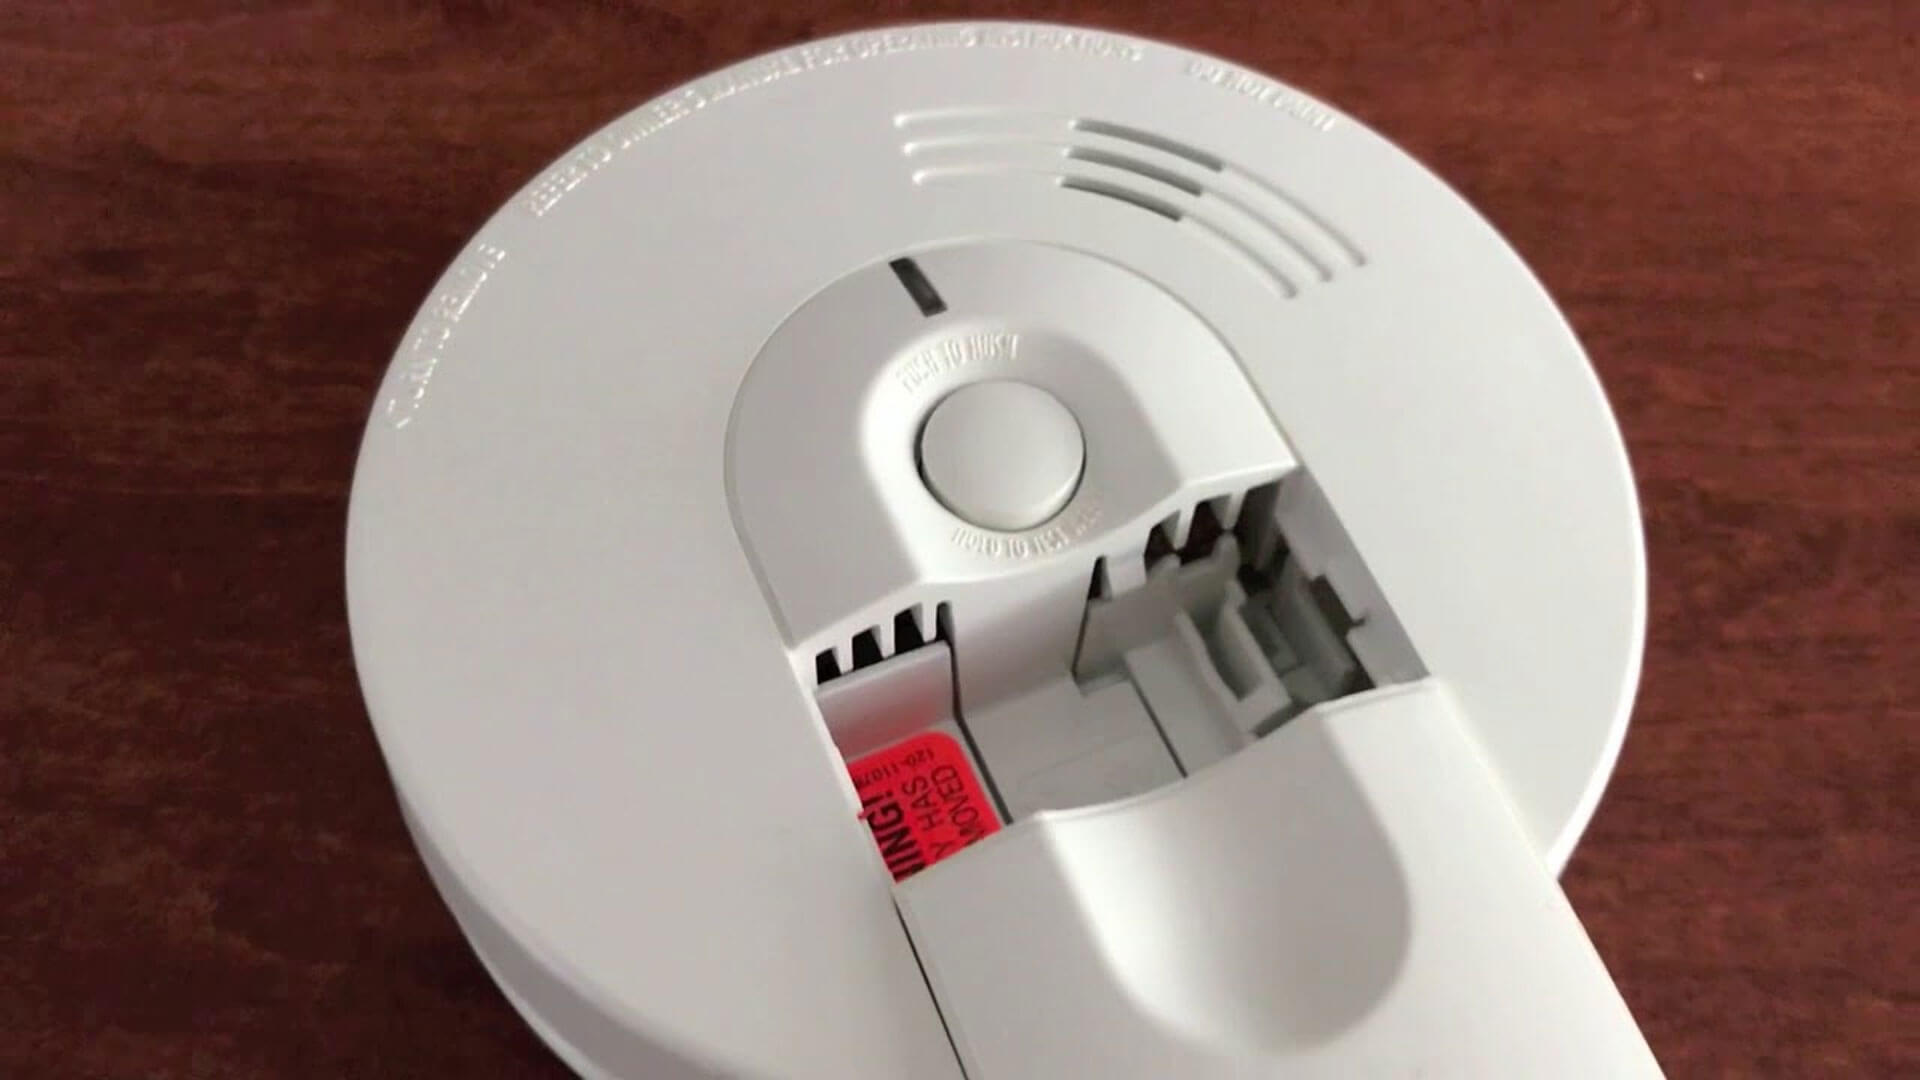 Why is My Smoke Detector Blinking Red Every 30 Seconds?